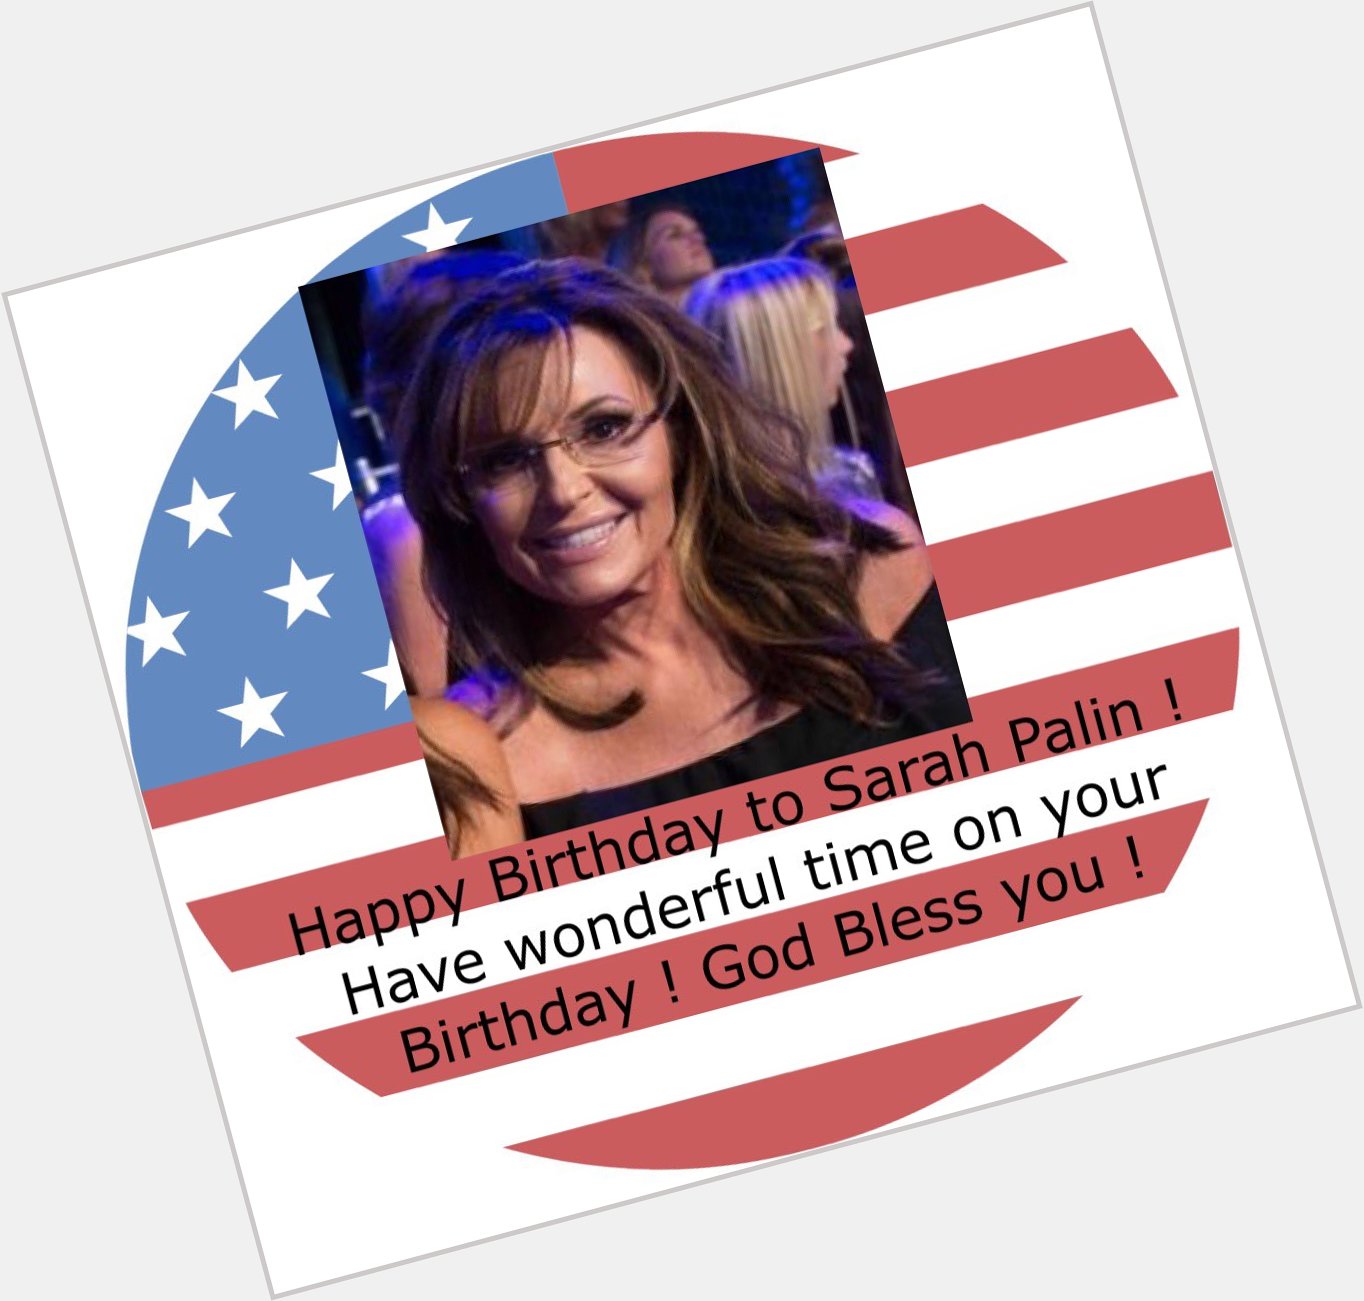 Happy Birthday to Sarah Palin! Have wonderful Time on your Birthday ! God bless you !        